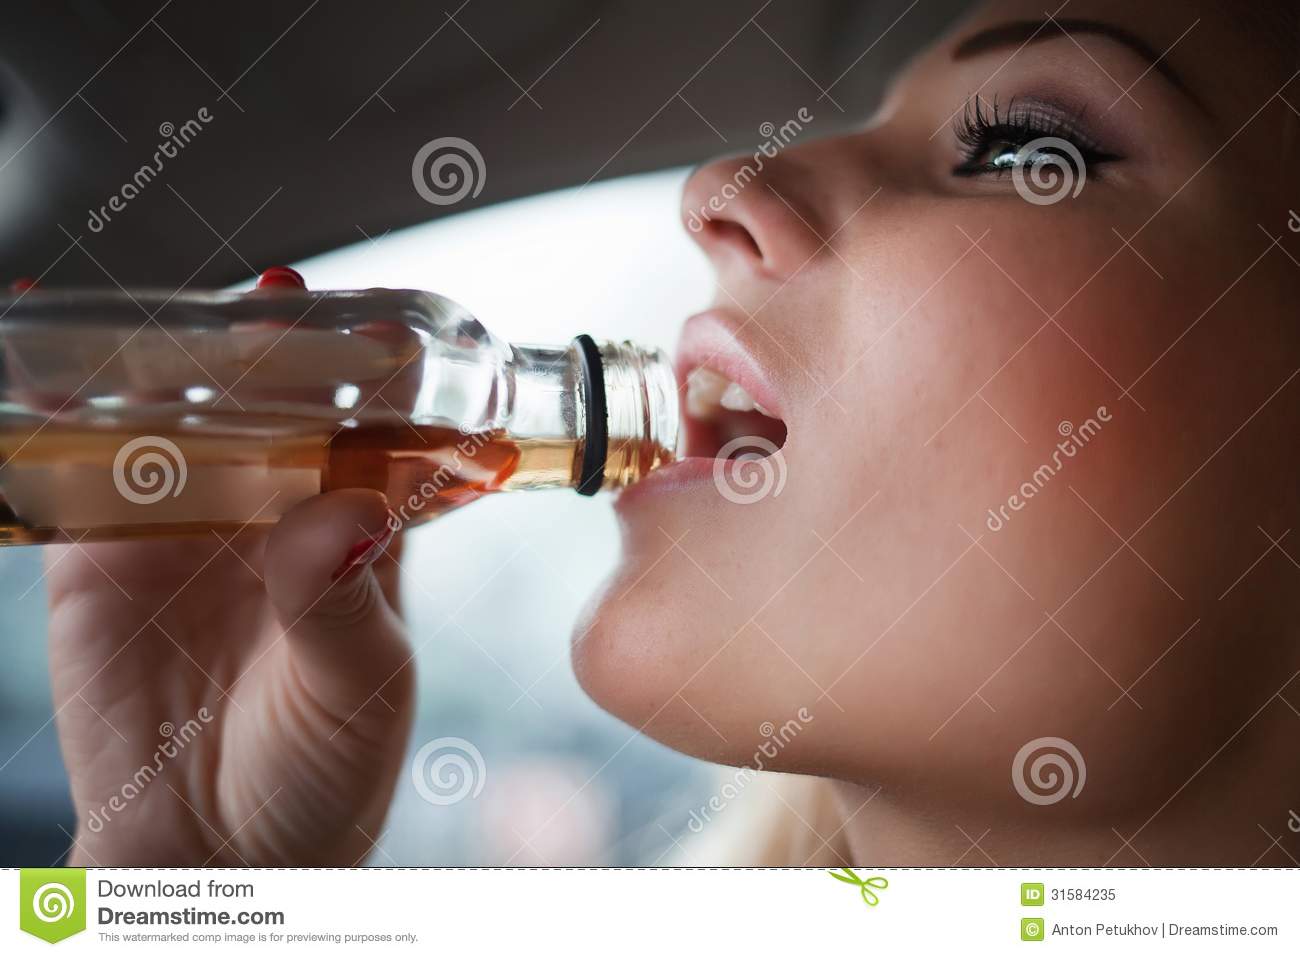 Woman Drinking In Car Royalty Free Stock Photo   Image  31584235